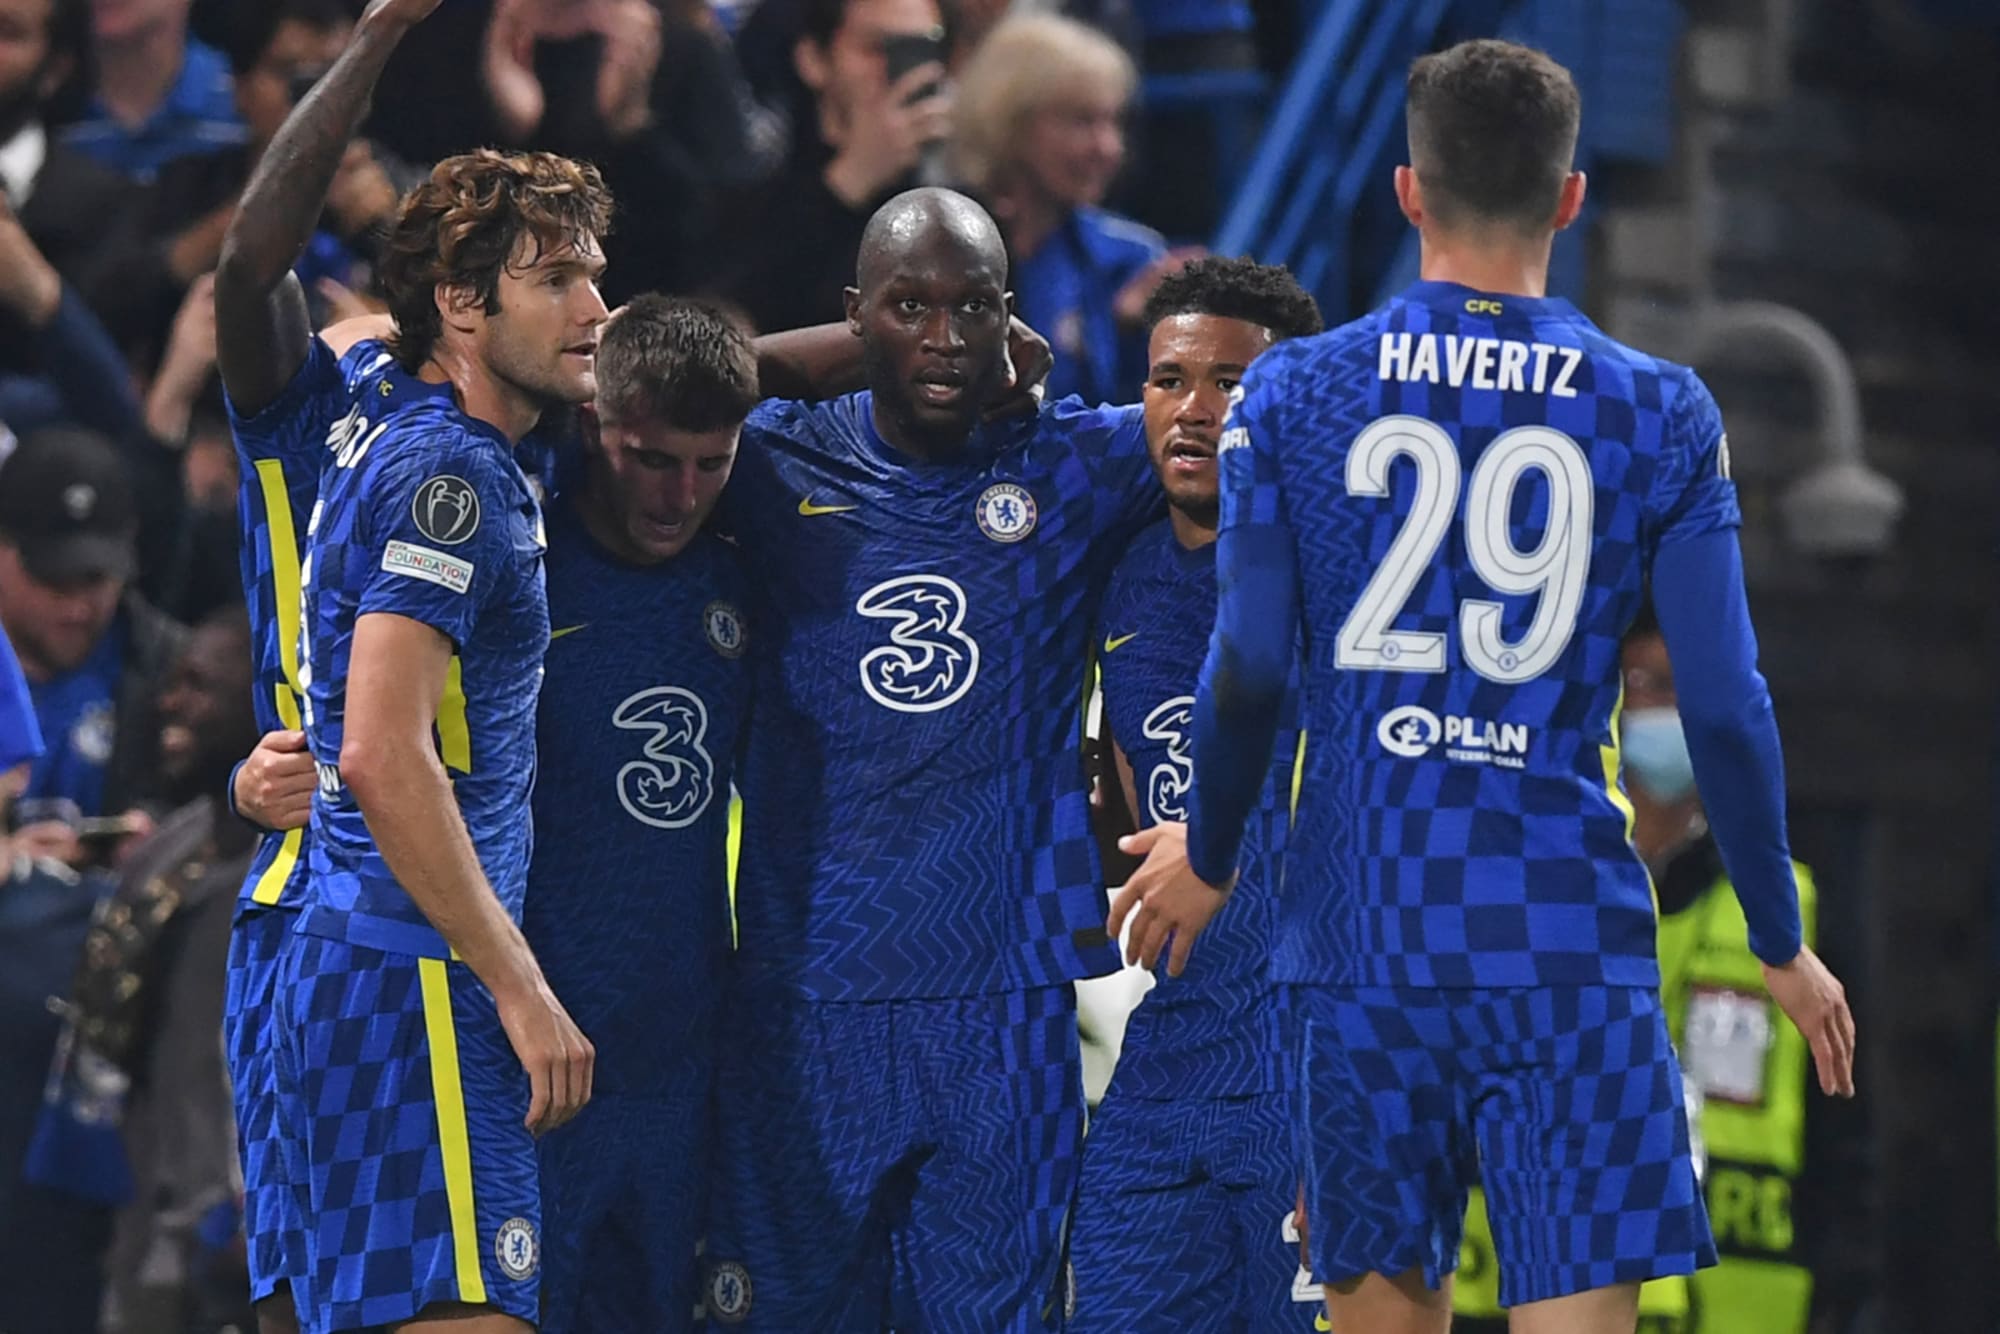 Chelsea vs Zenit: Three lessons learnt in Champions League opener